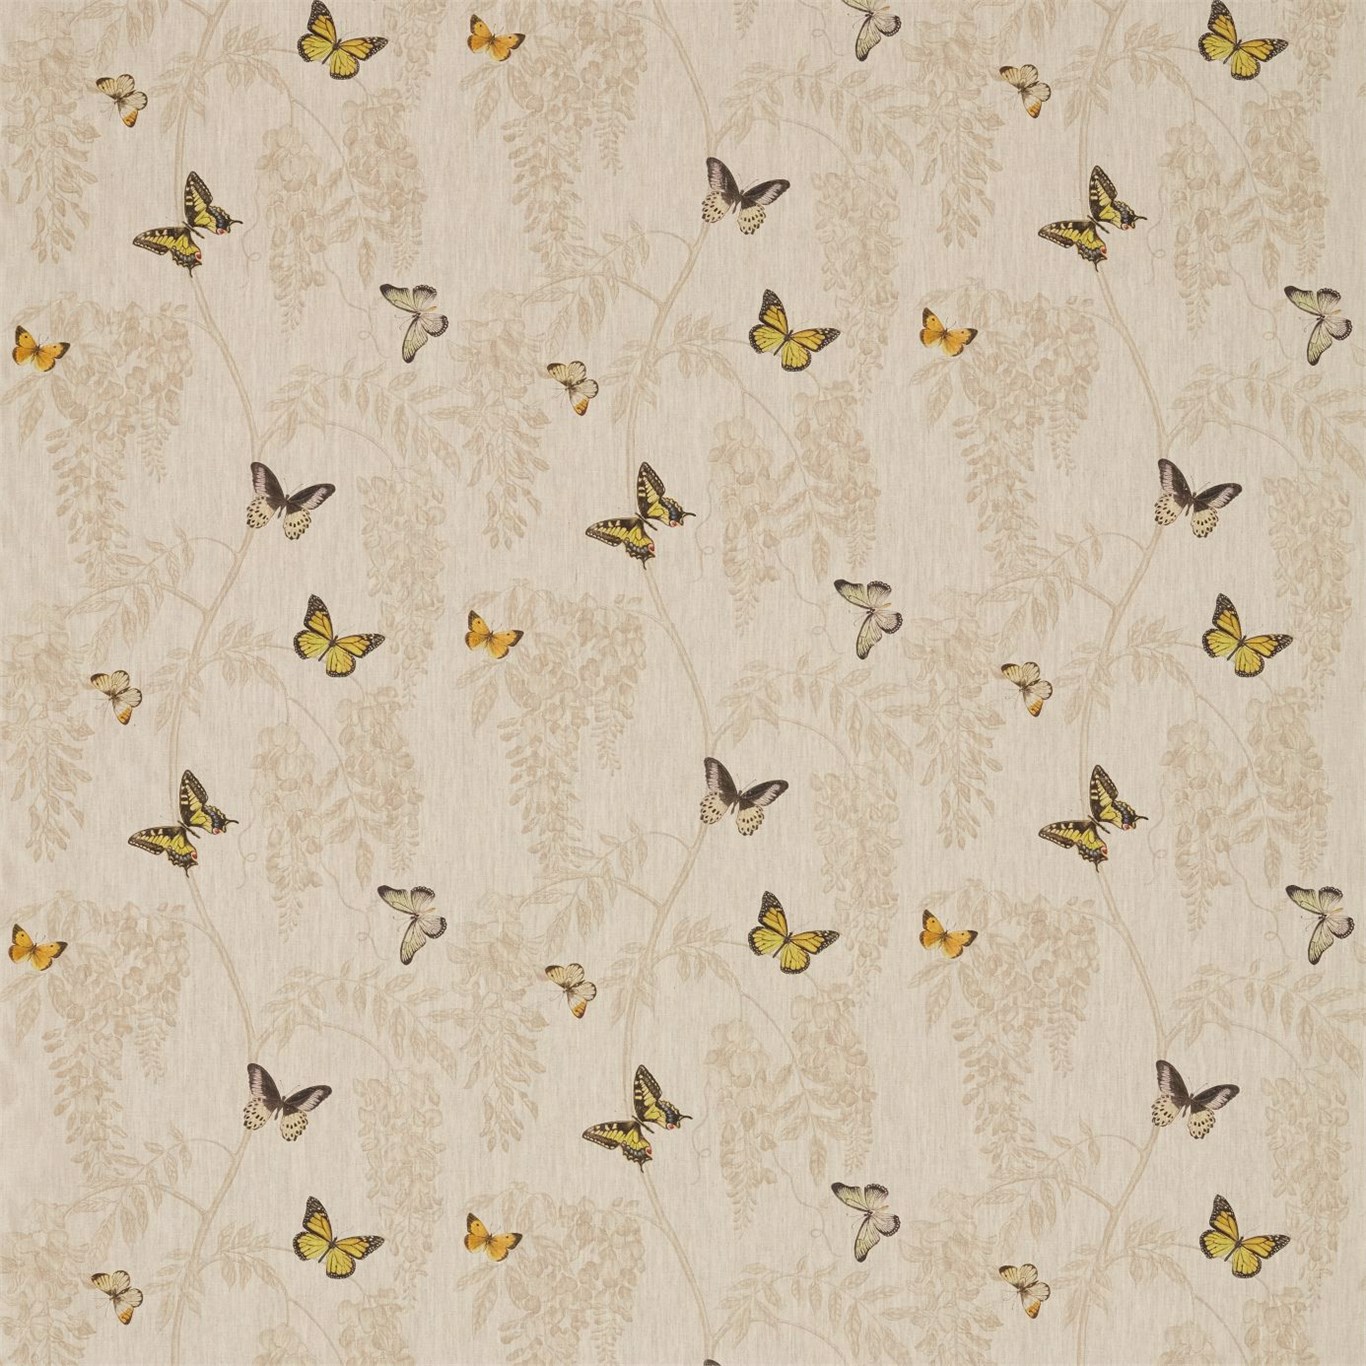 Wisteria & Butterfly Linen/Citrus Fabric by SAN